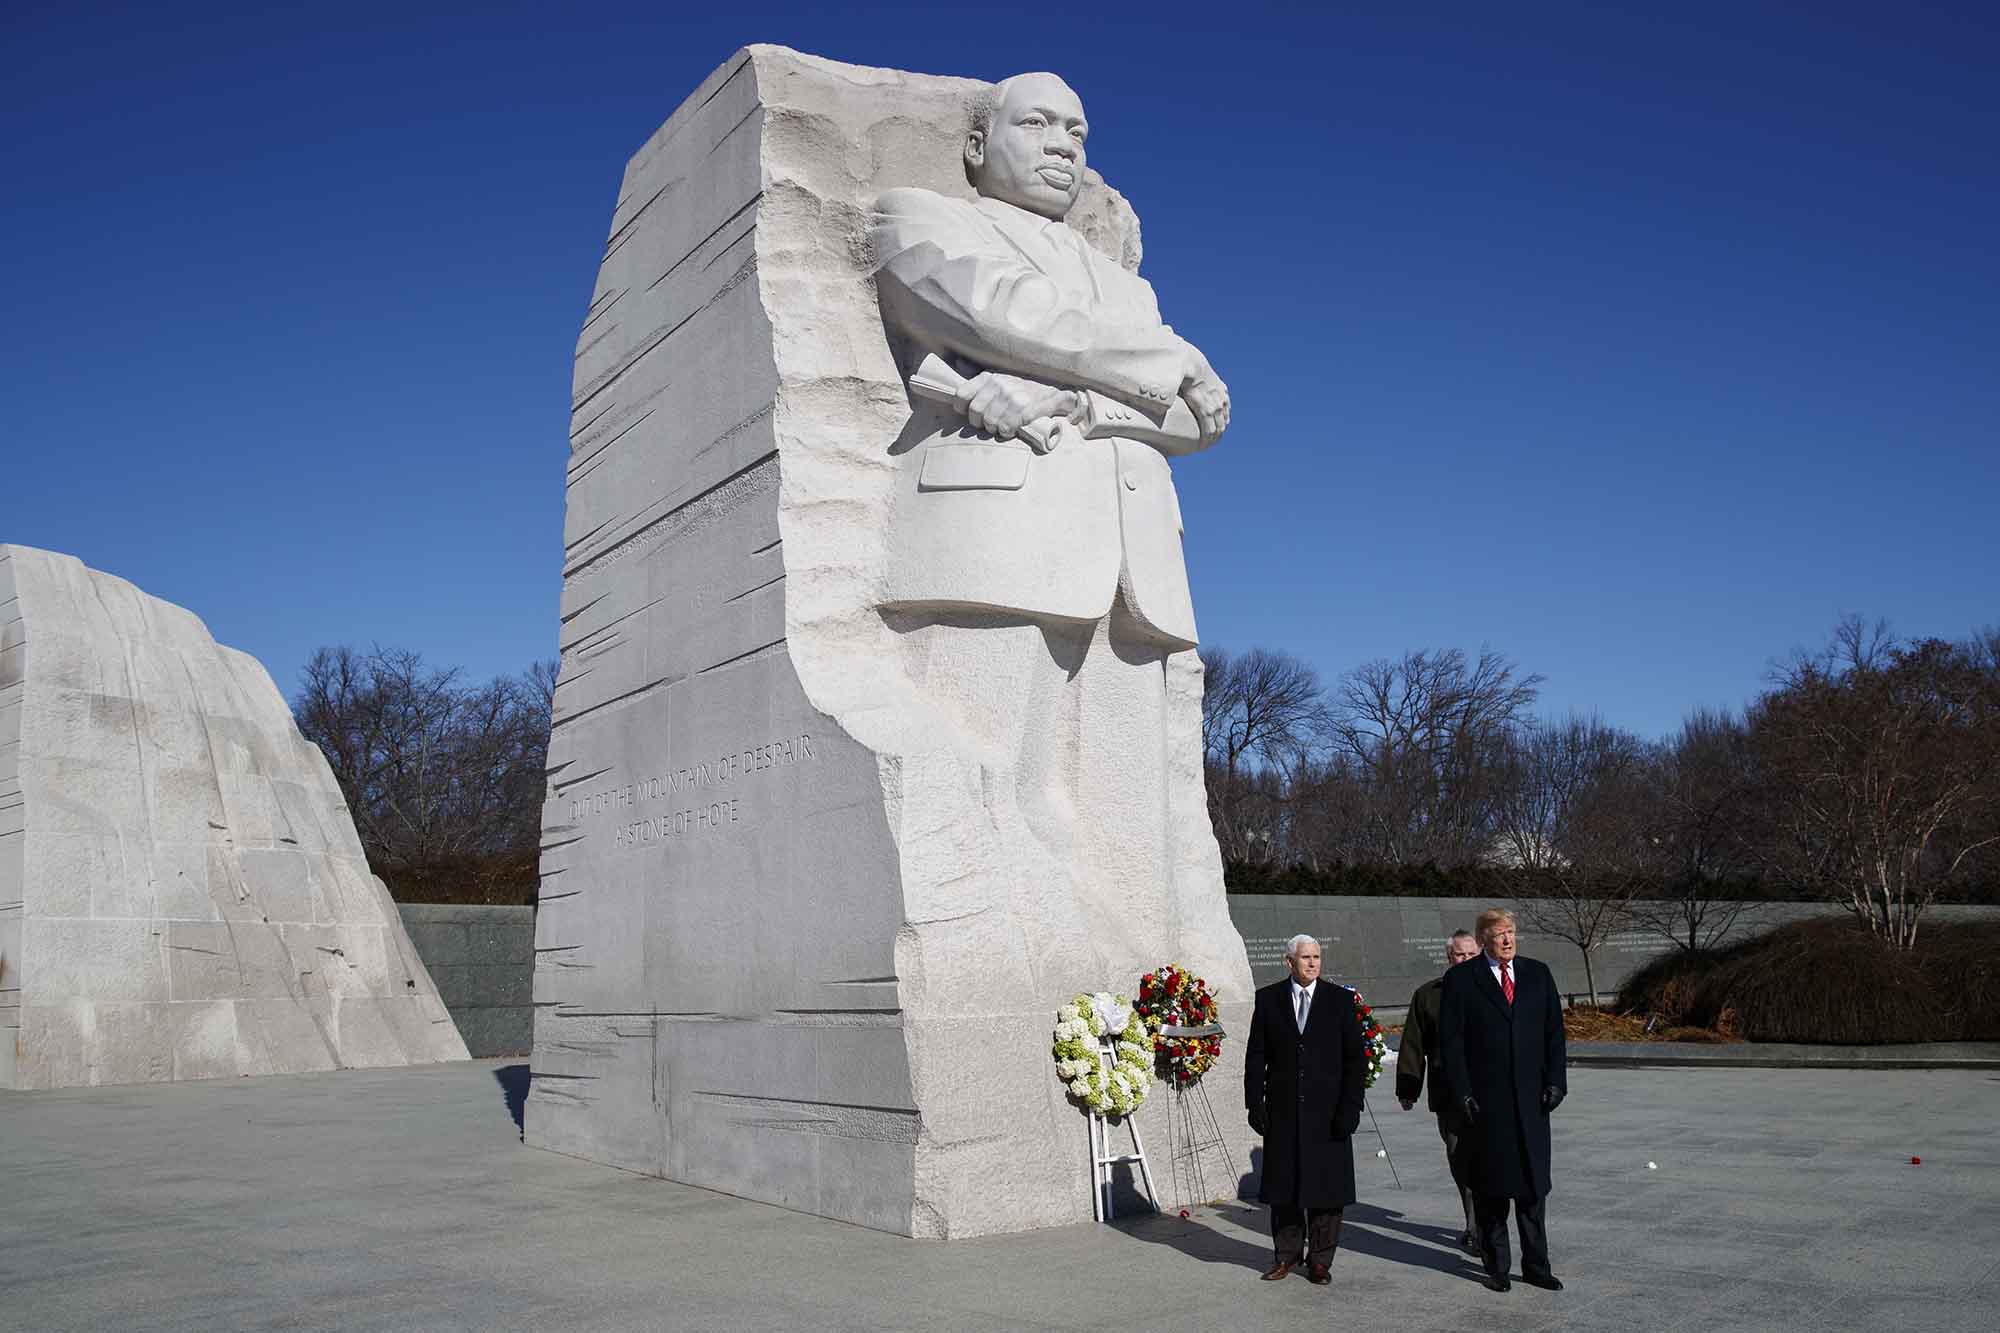 PHOTO: President Donald Trump, right, and Vice President Mike Pence, left, visit the Martin Luther King Jr. Memorial, Jan. 21, 2019, in Washington D.C.